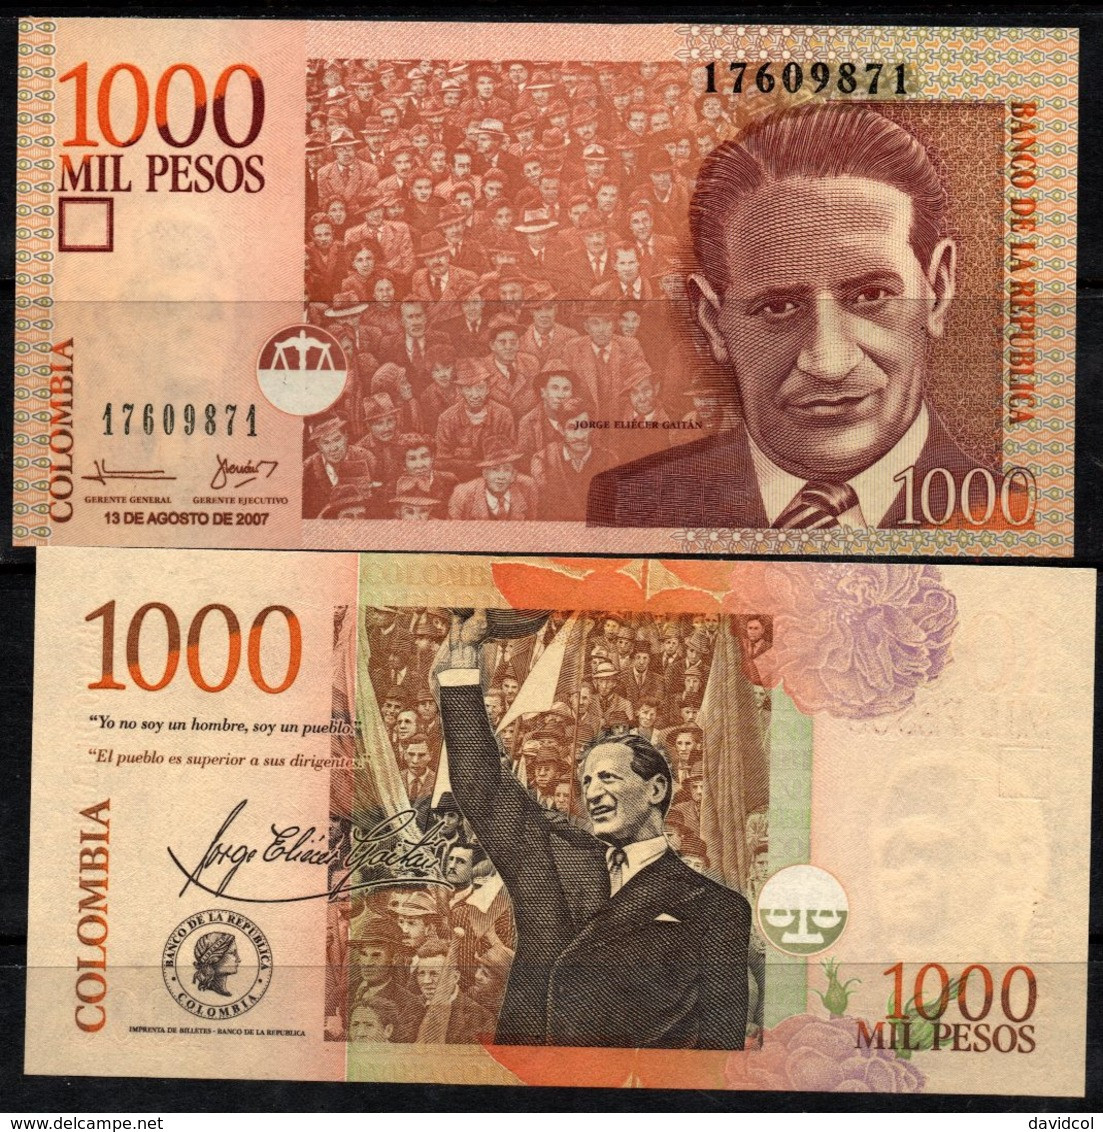 COLOMBIA - 2007- MIL PESOS  ($1000) - UNCIRCULATED. CONDITION 9/10 - Colombie